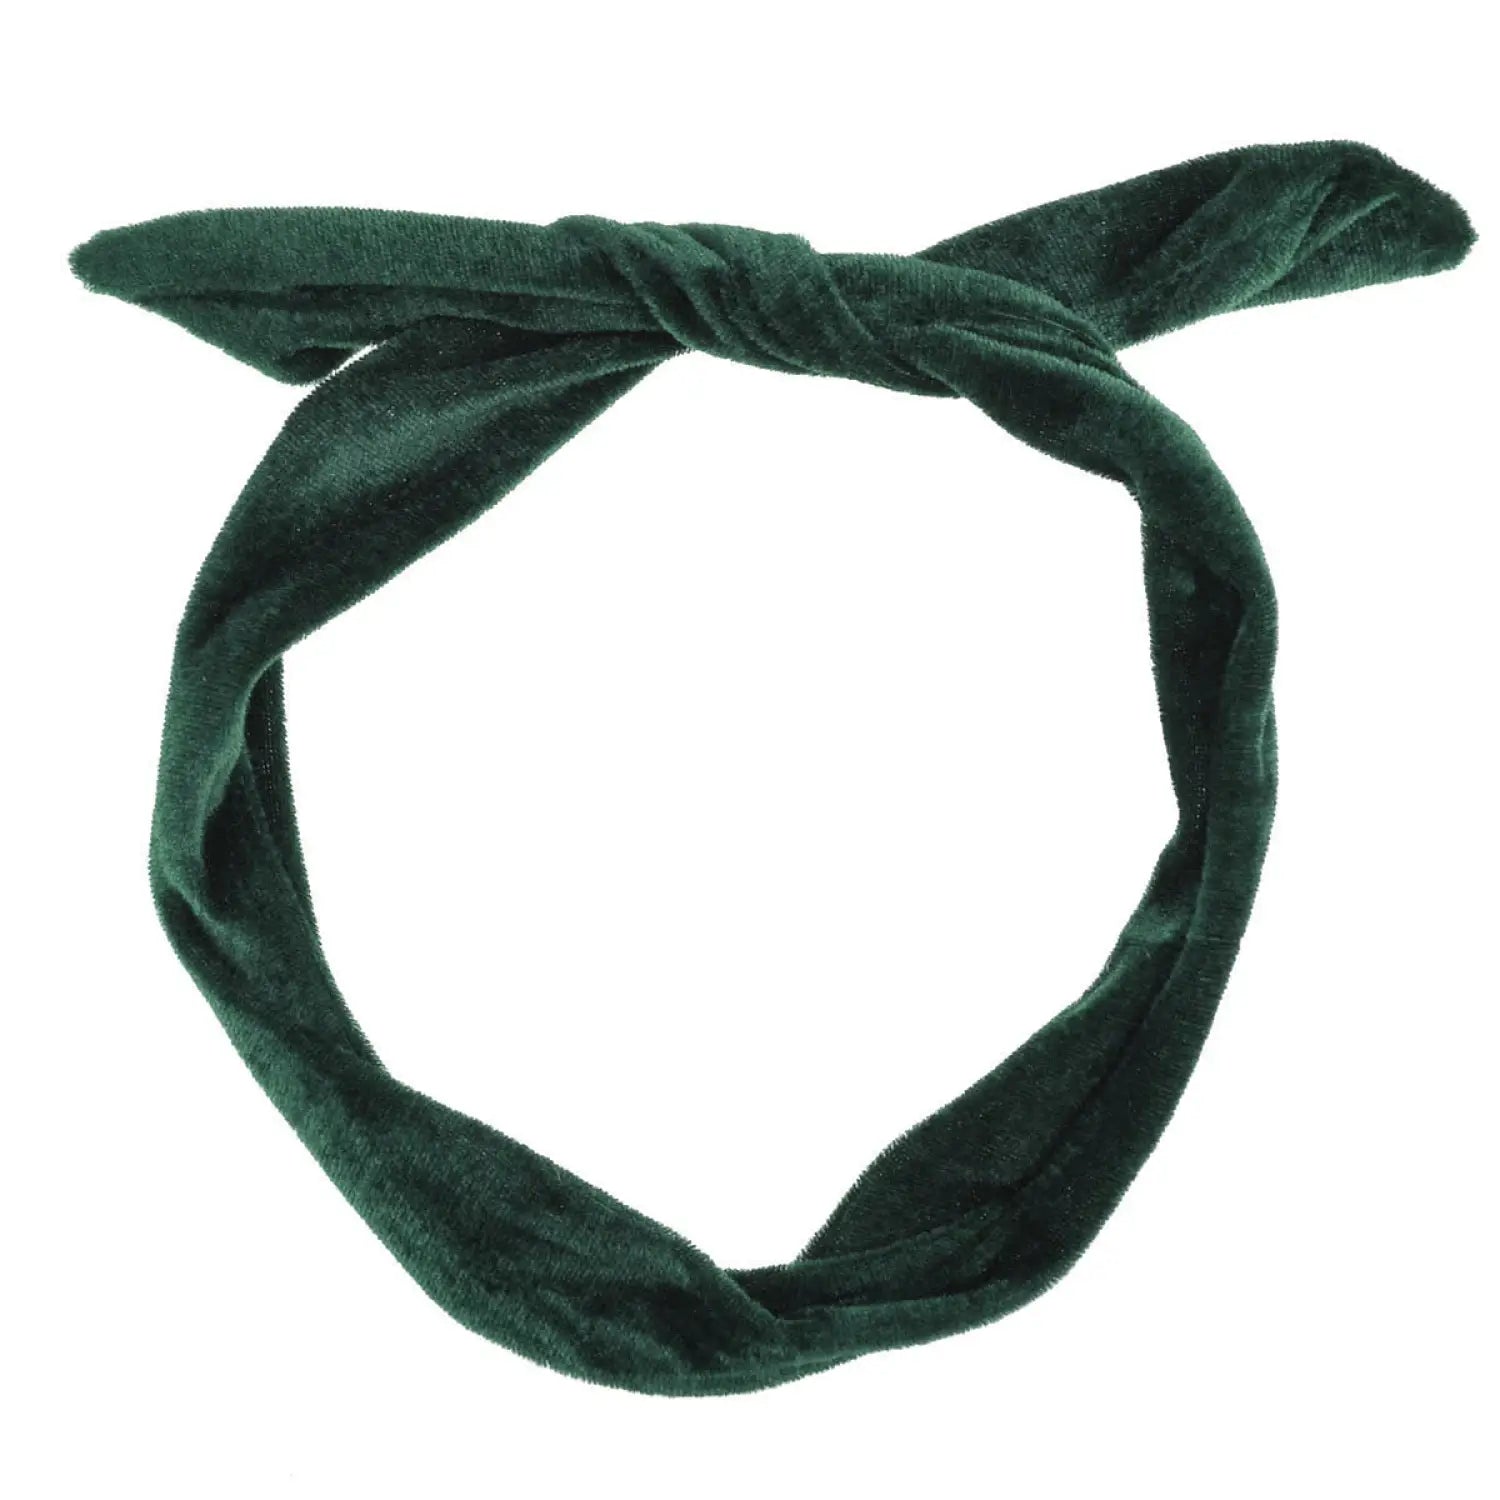 Green velvet wired bunny ears headband with knot detail.